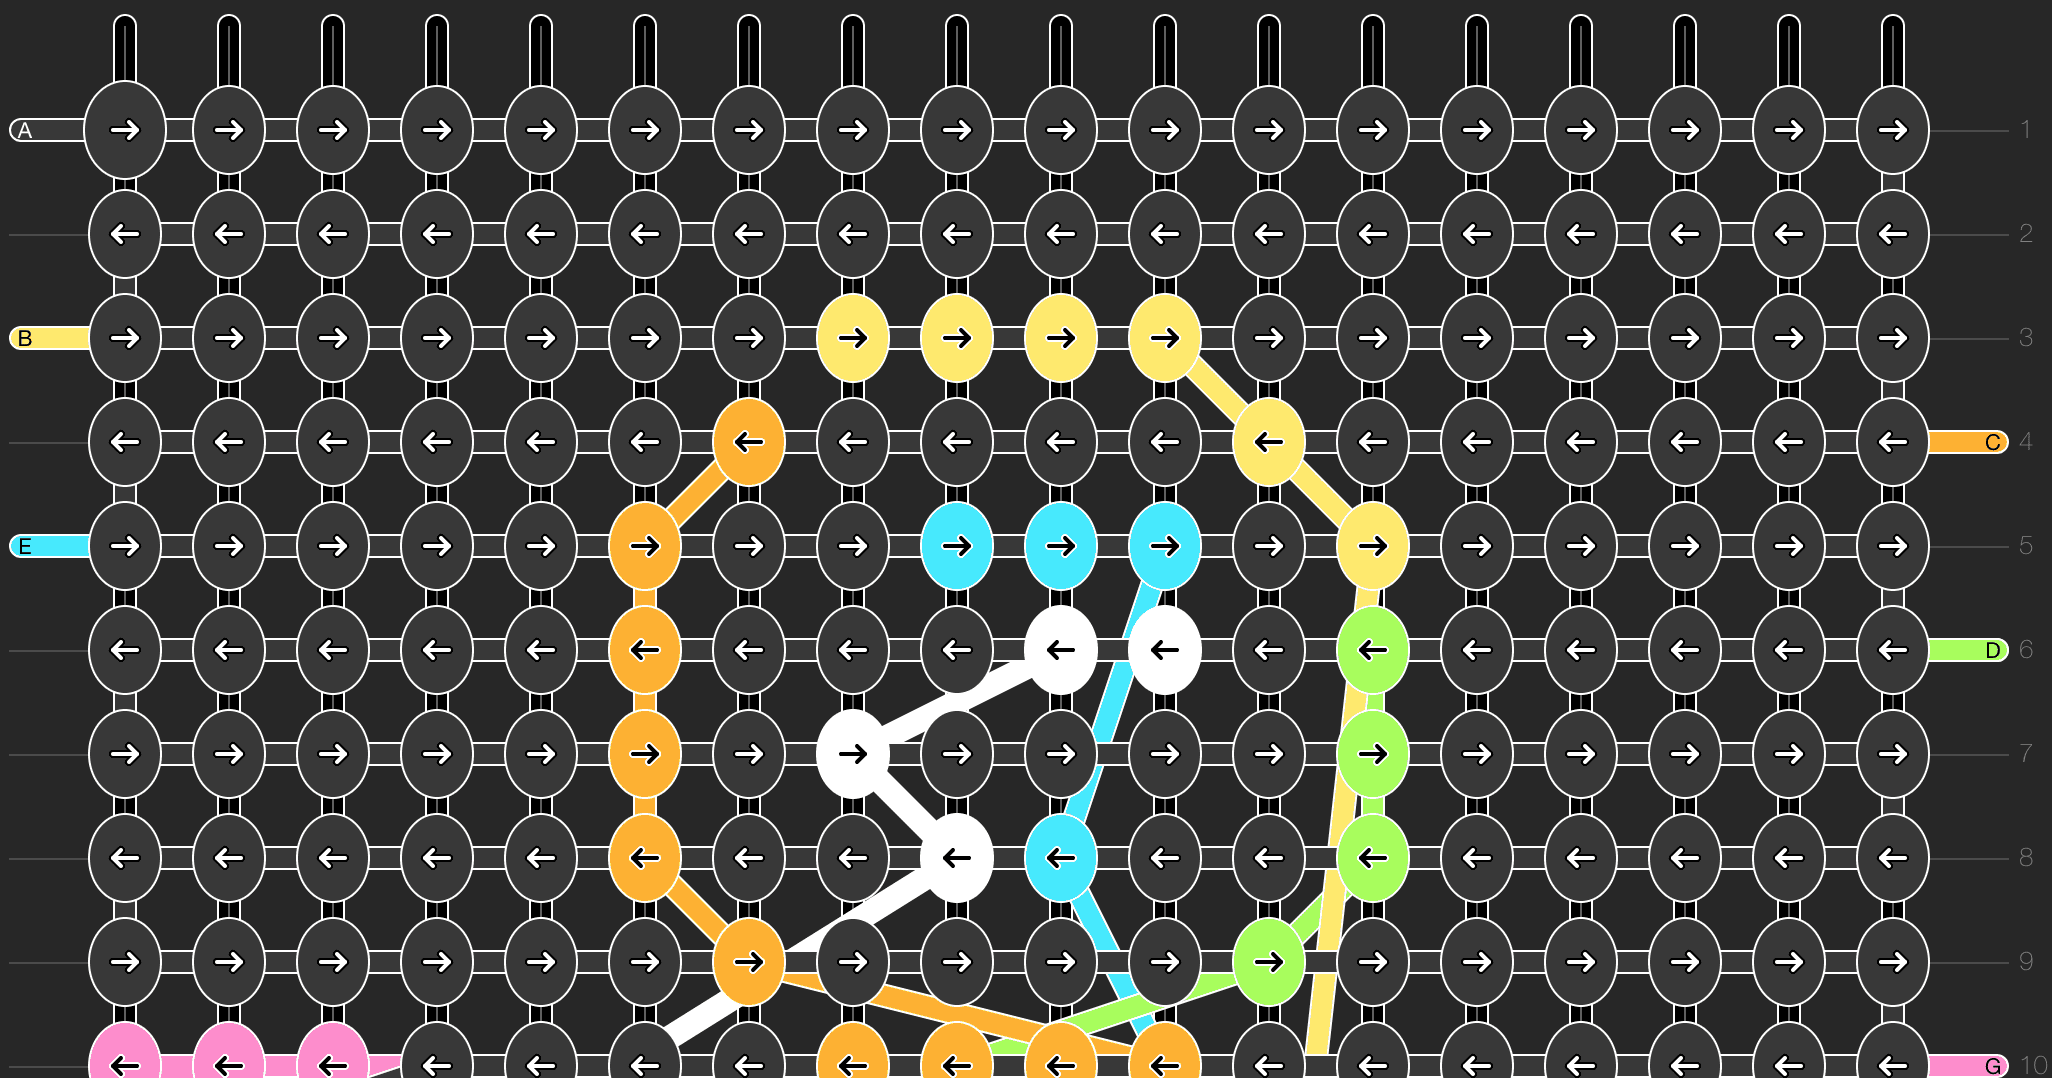 Part of an alpha pattern diagram from braceletbook.